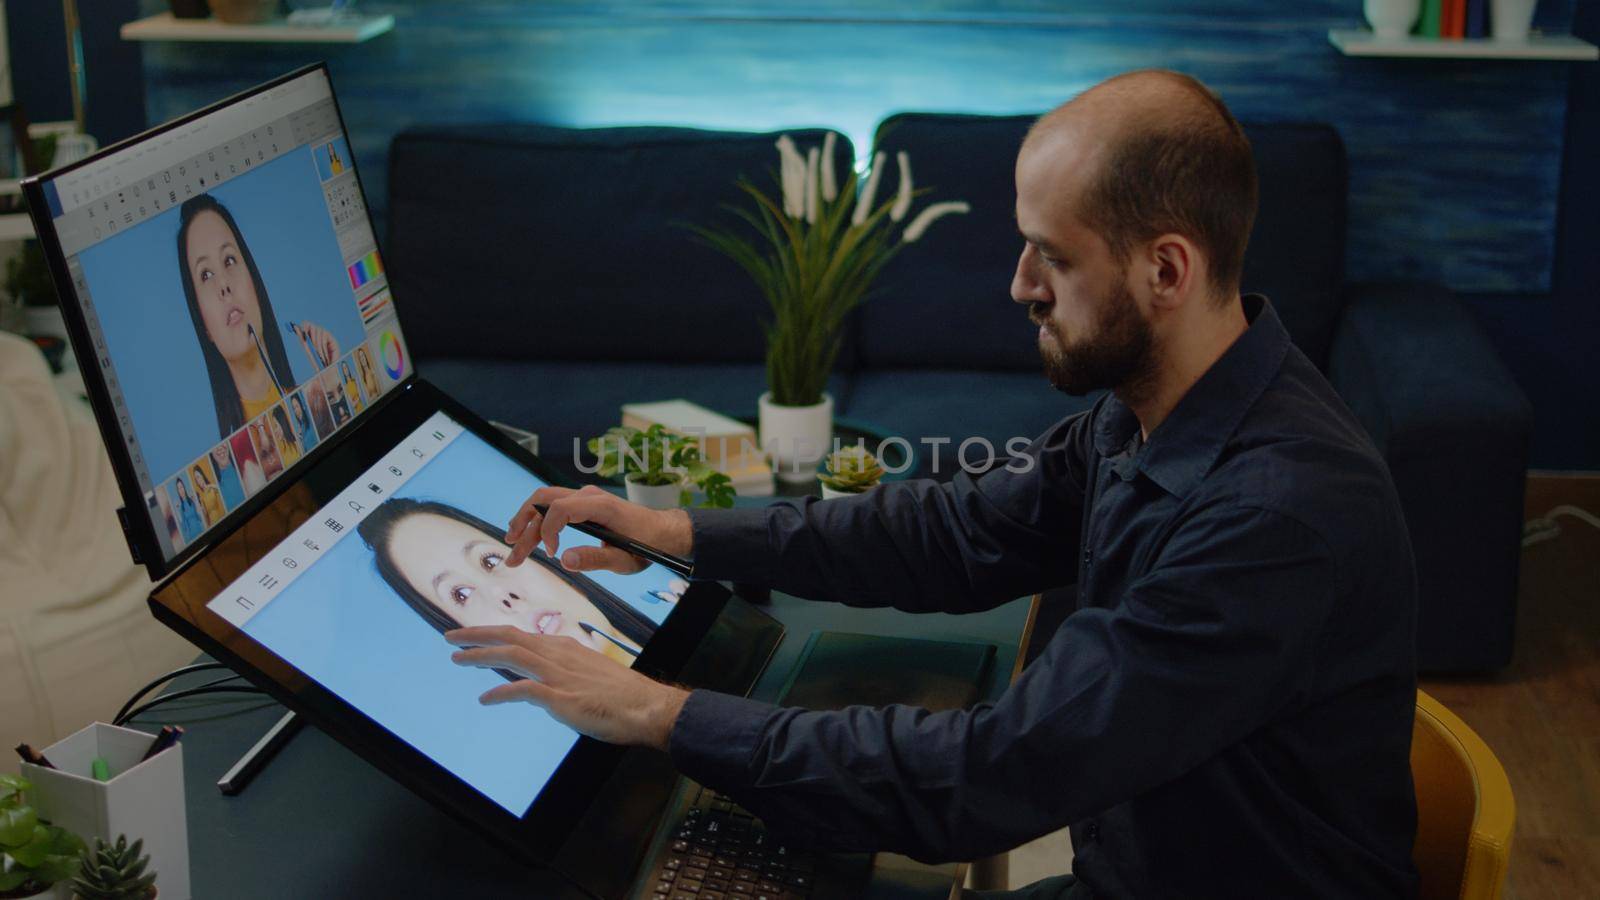 Media artist working on touch screen monitor to edit pictures by DCStudio